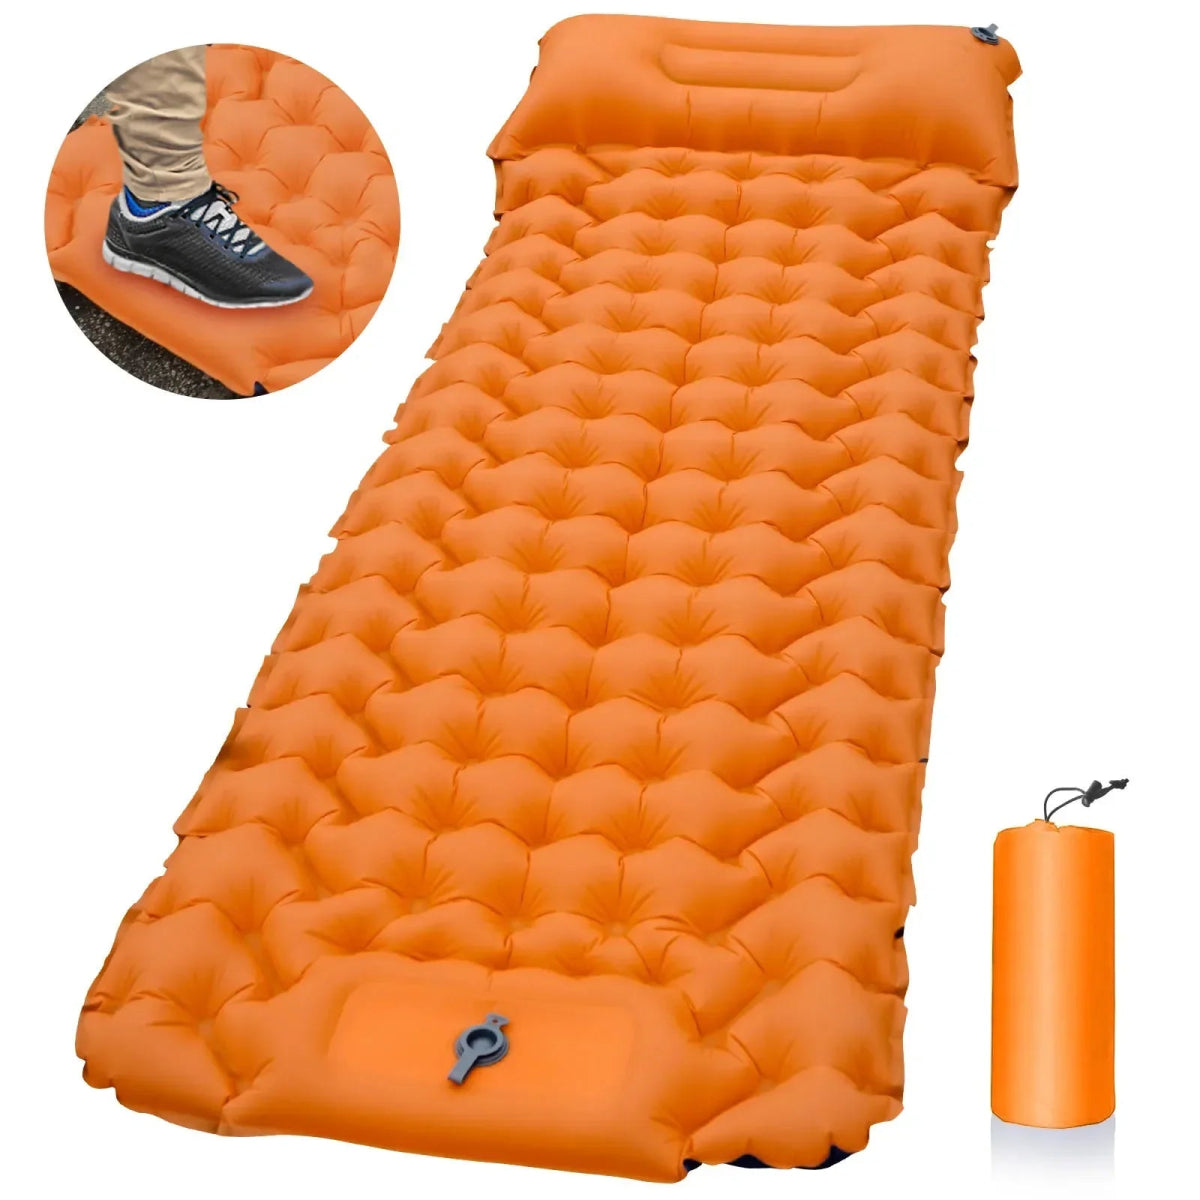 Outdoor Sleeping Pad for Camping, Inflatable Mattress with Pillows Travel Mat - Coffeio Store